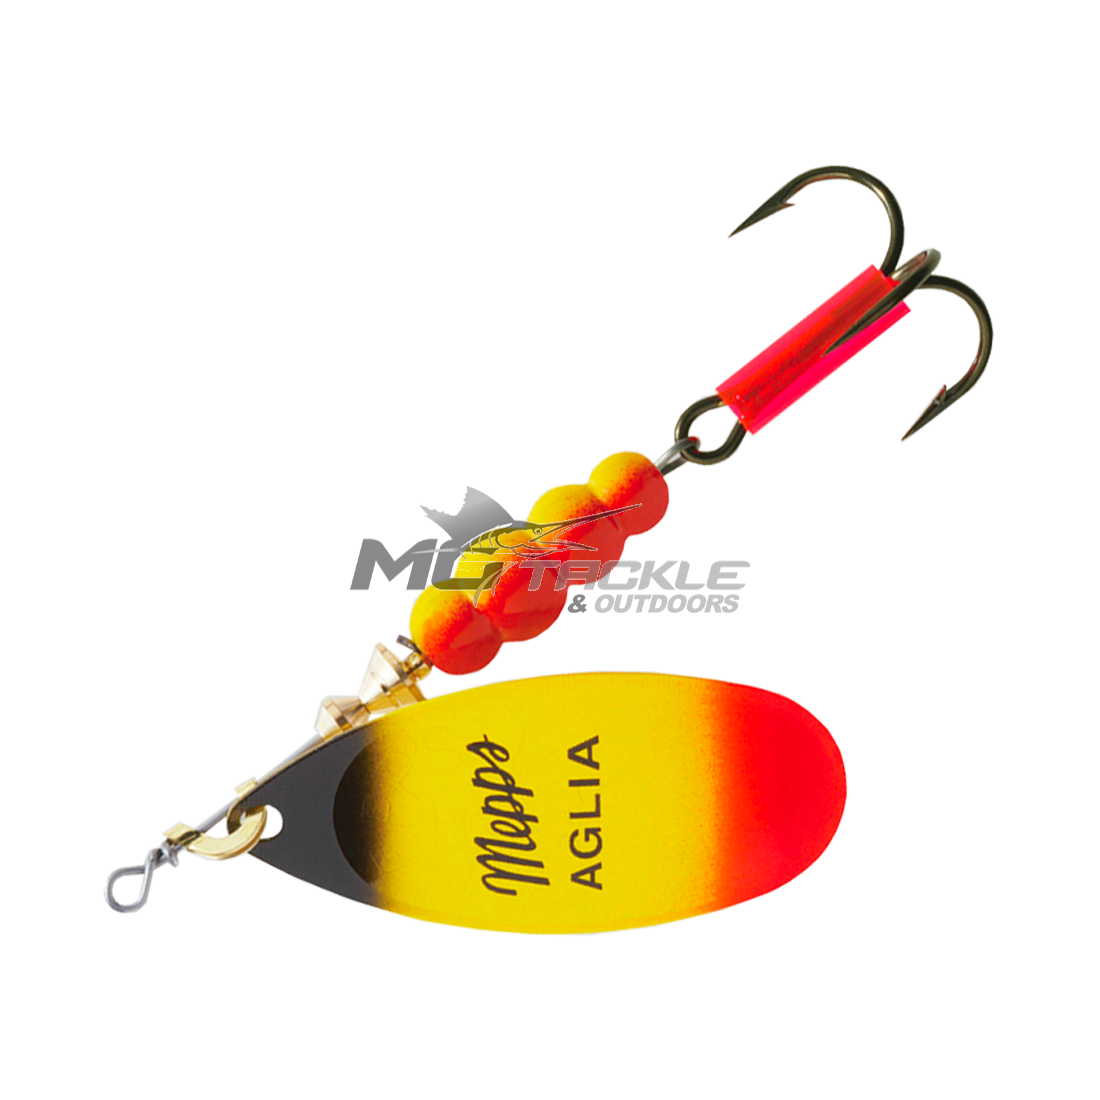 Mepps Aglia Fluo  MoTackle & Outdoors